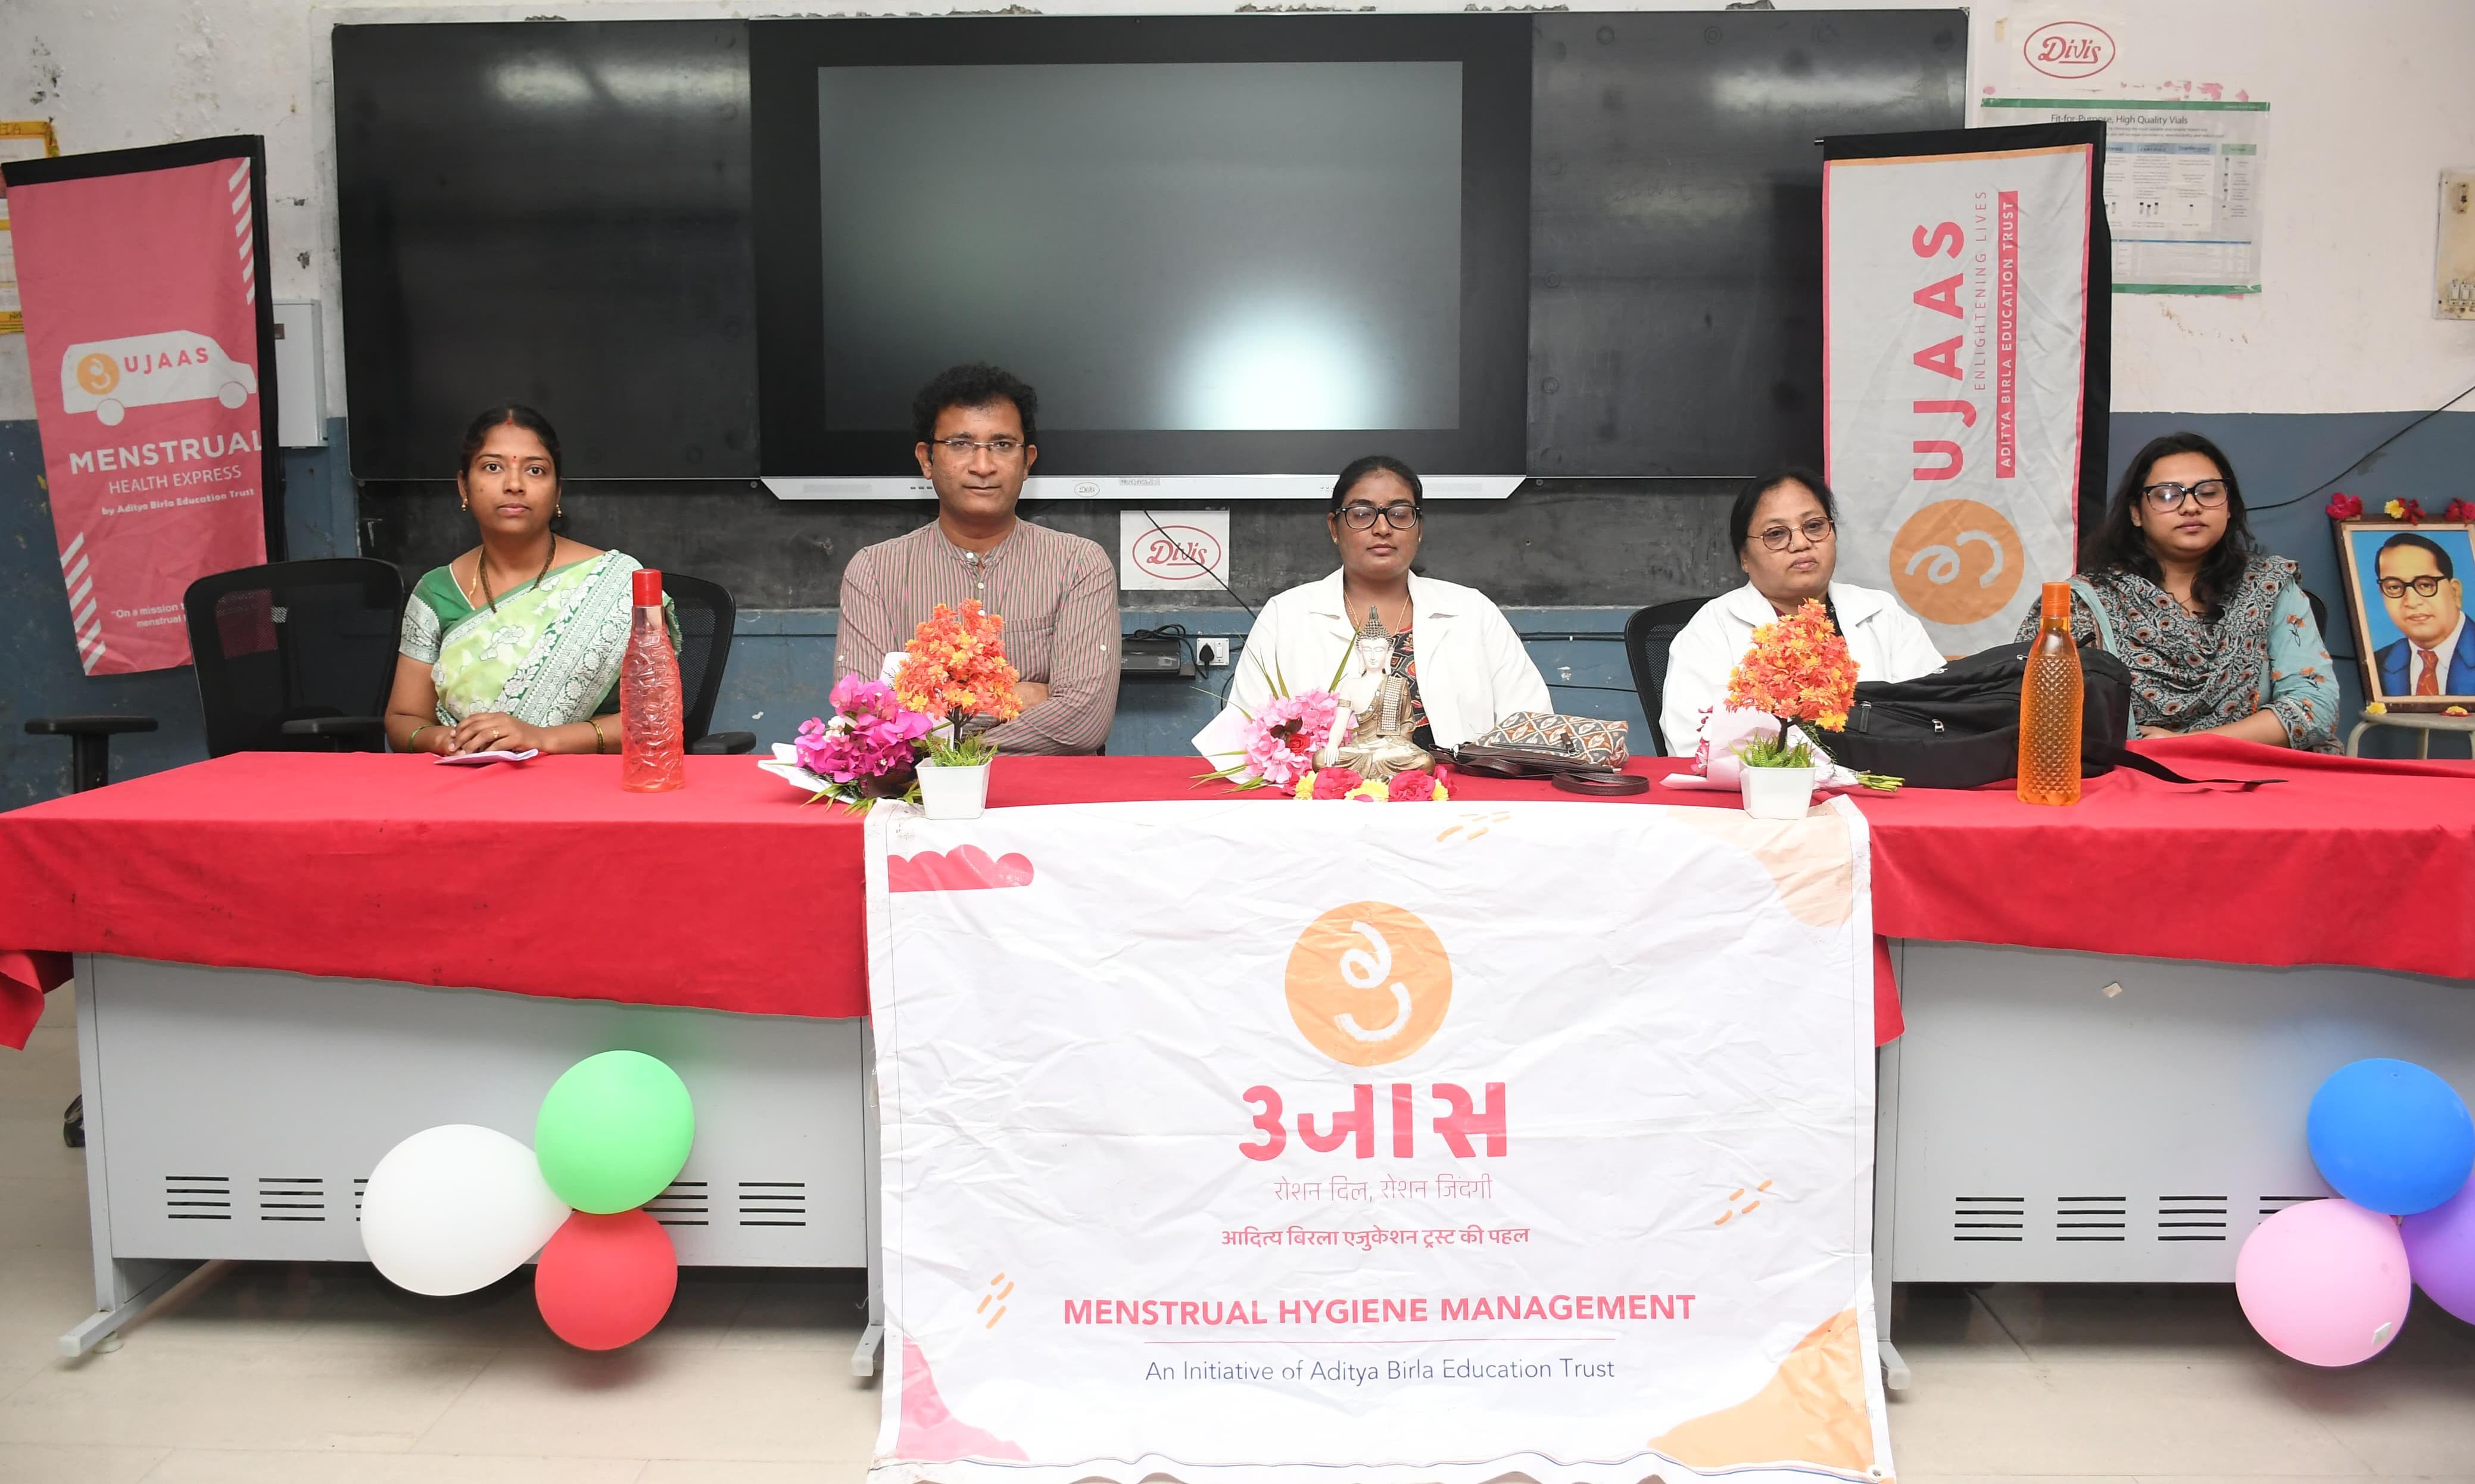 Ujaas Menstrual Health Express Launches Campaign in Andhra Pradesh